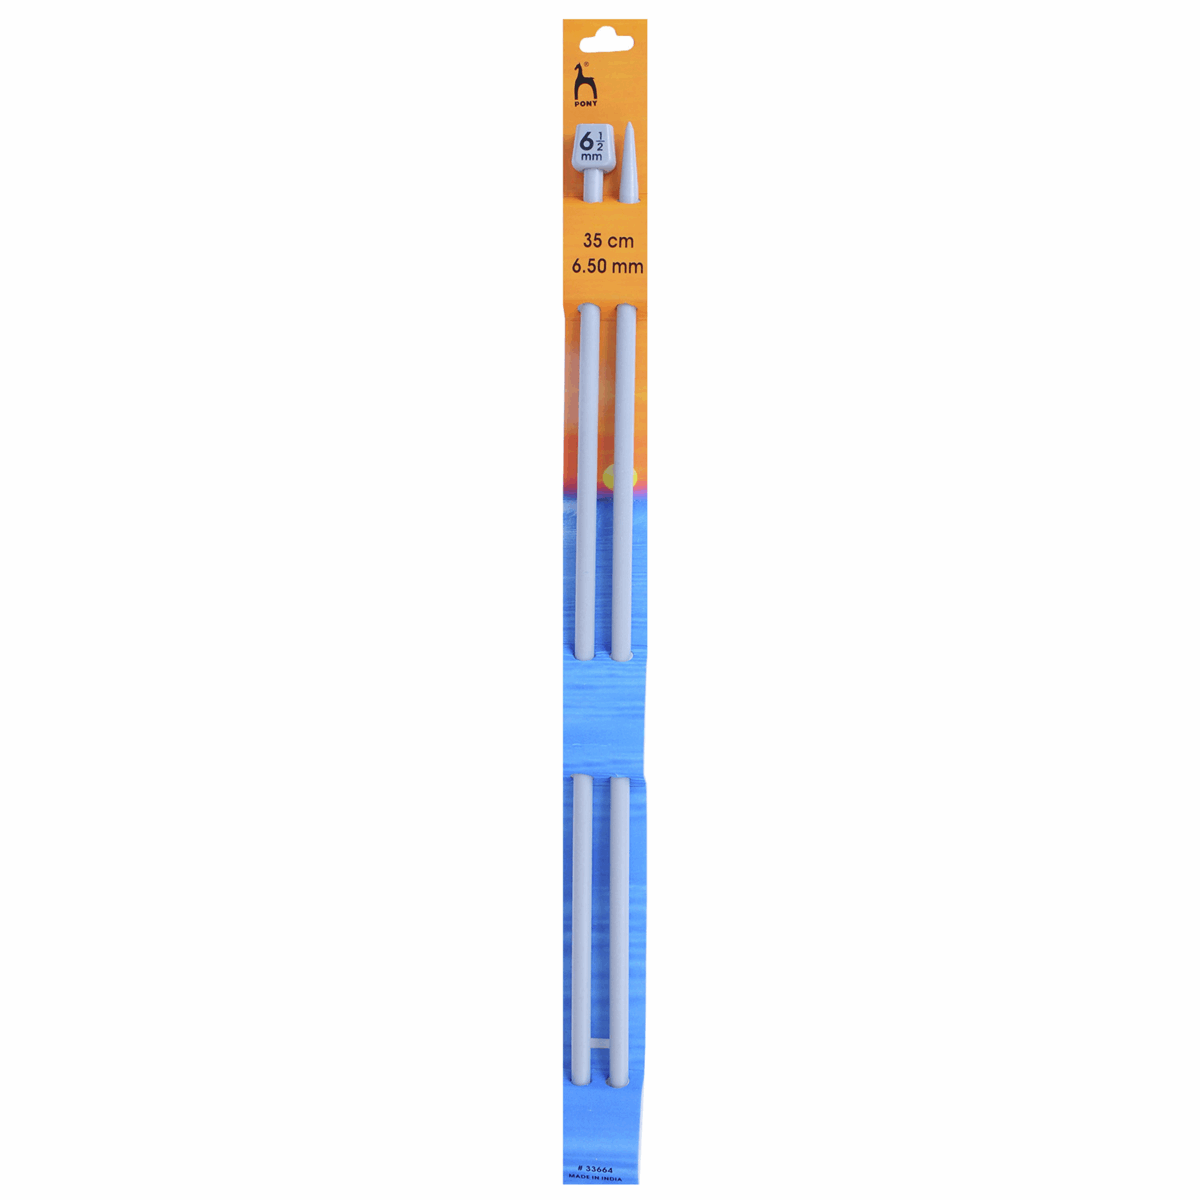 PONY Classic Single-Ended Knitting Pins - 35cm x 6.50mm